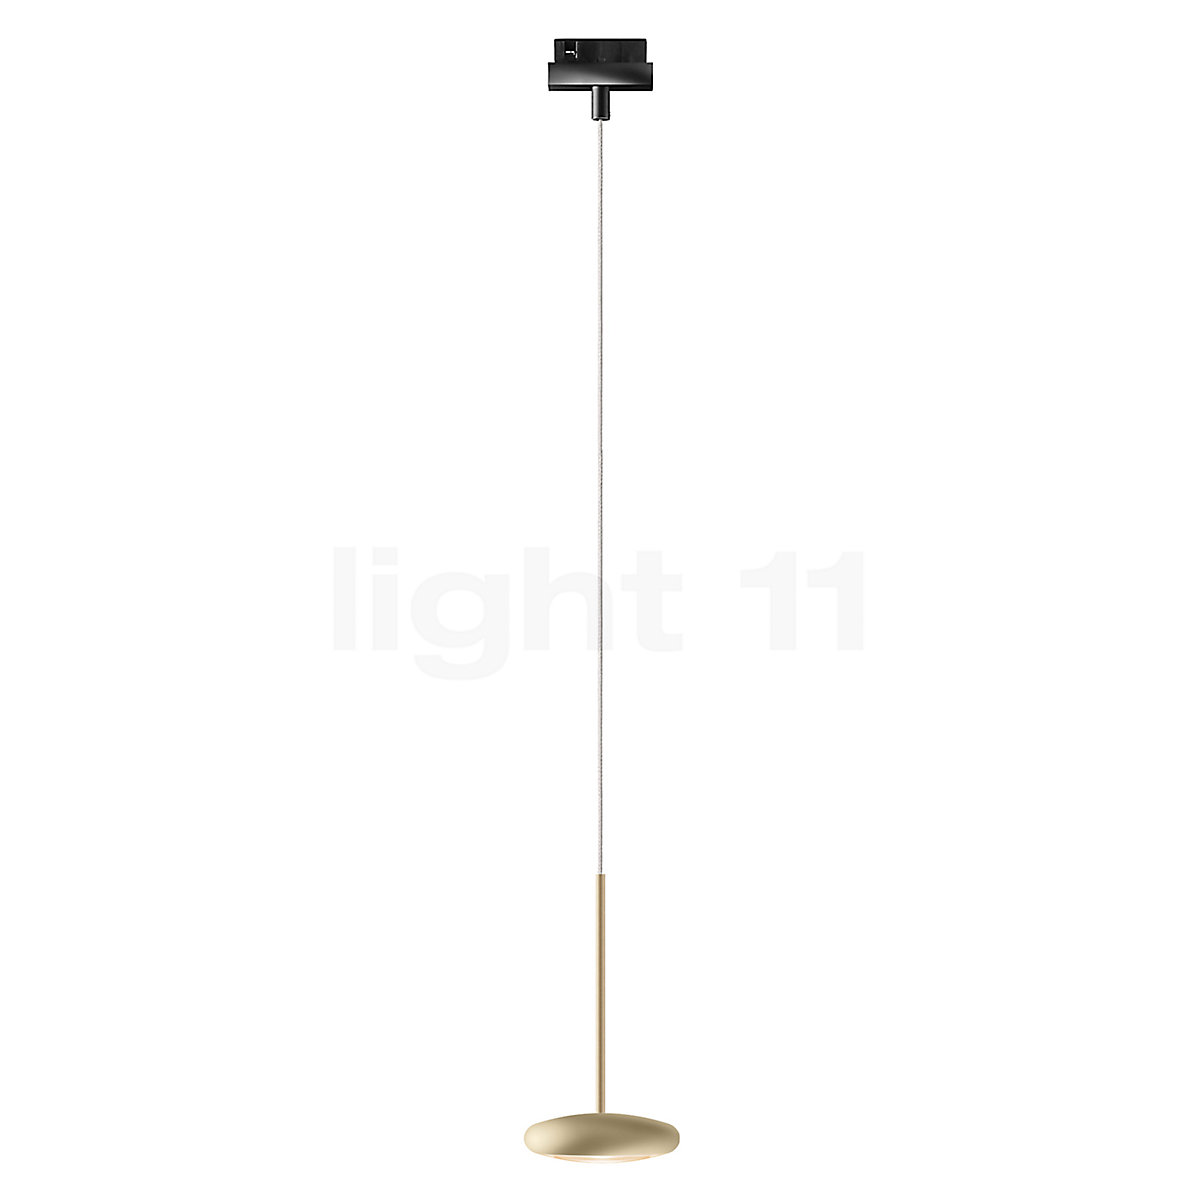 Buy Bruck Blop for Pendant Track Duolare Light at LED